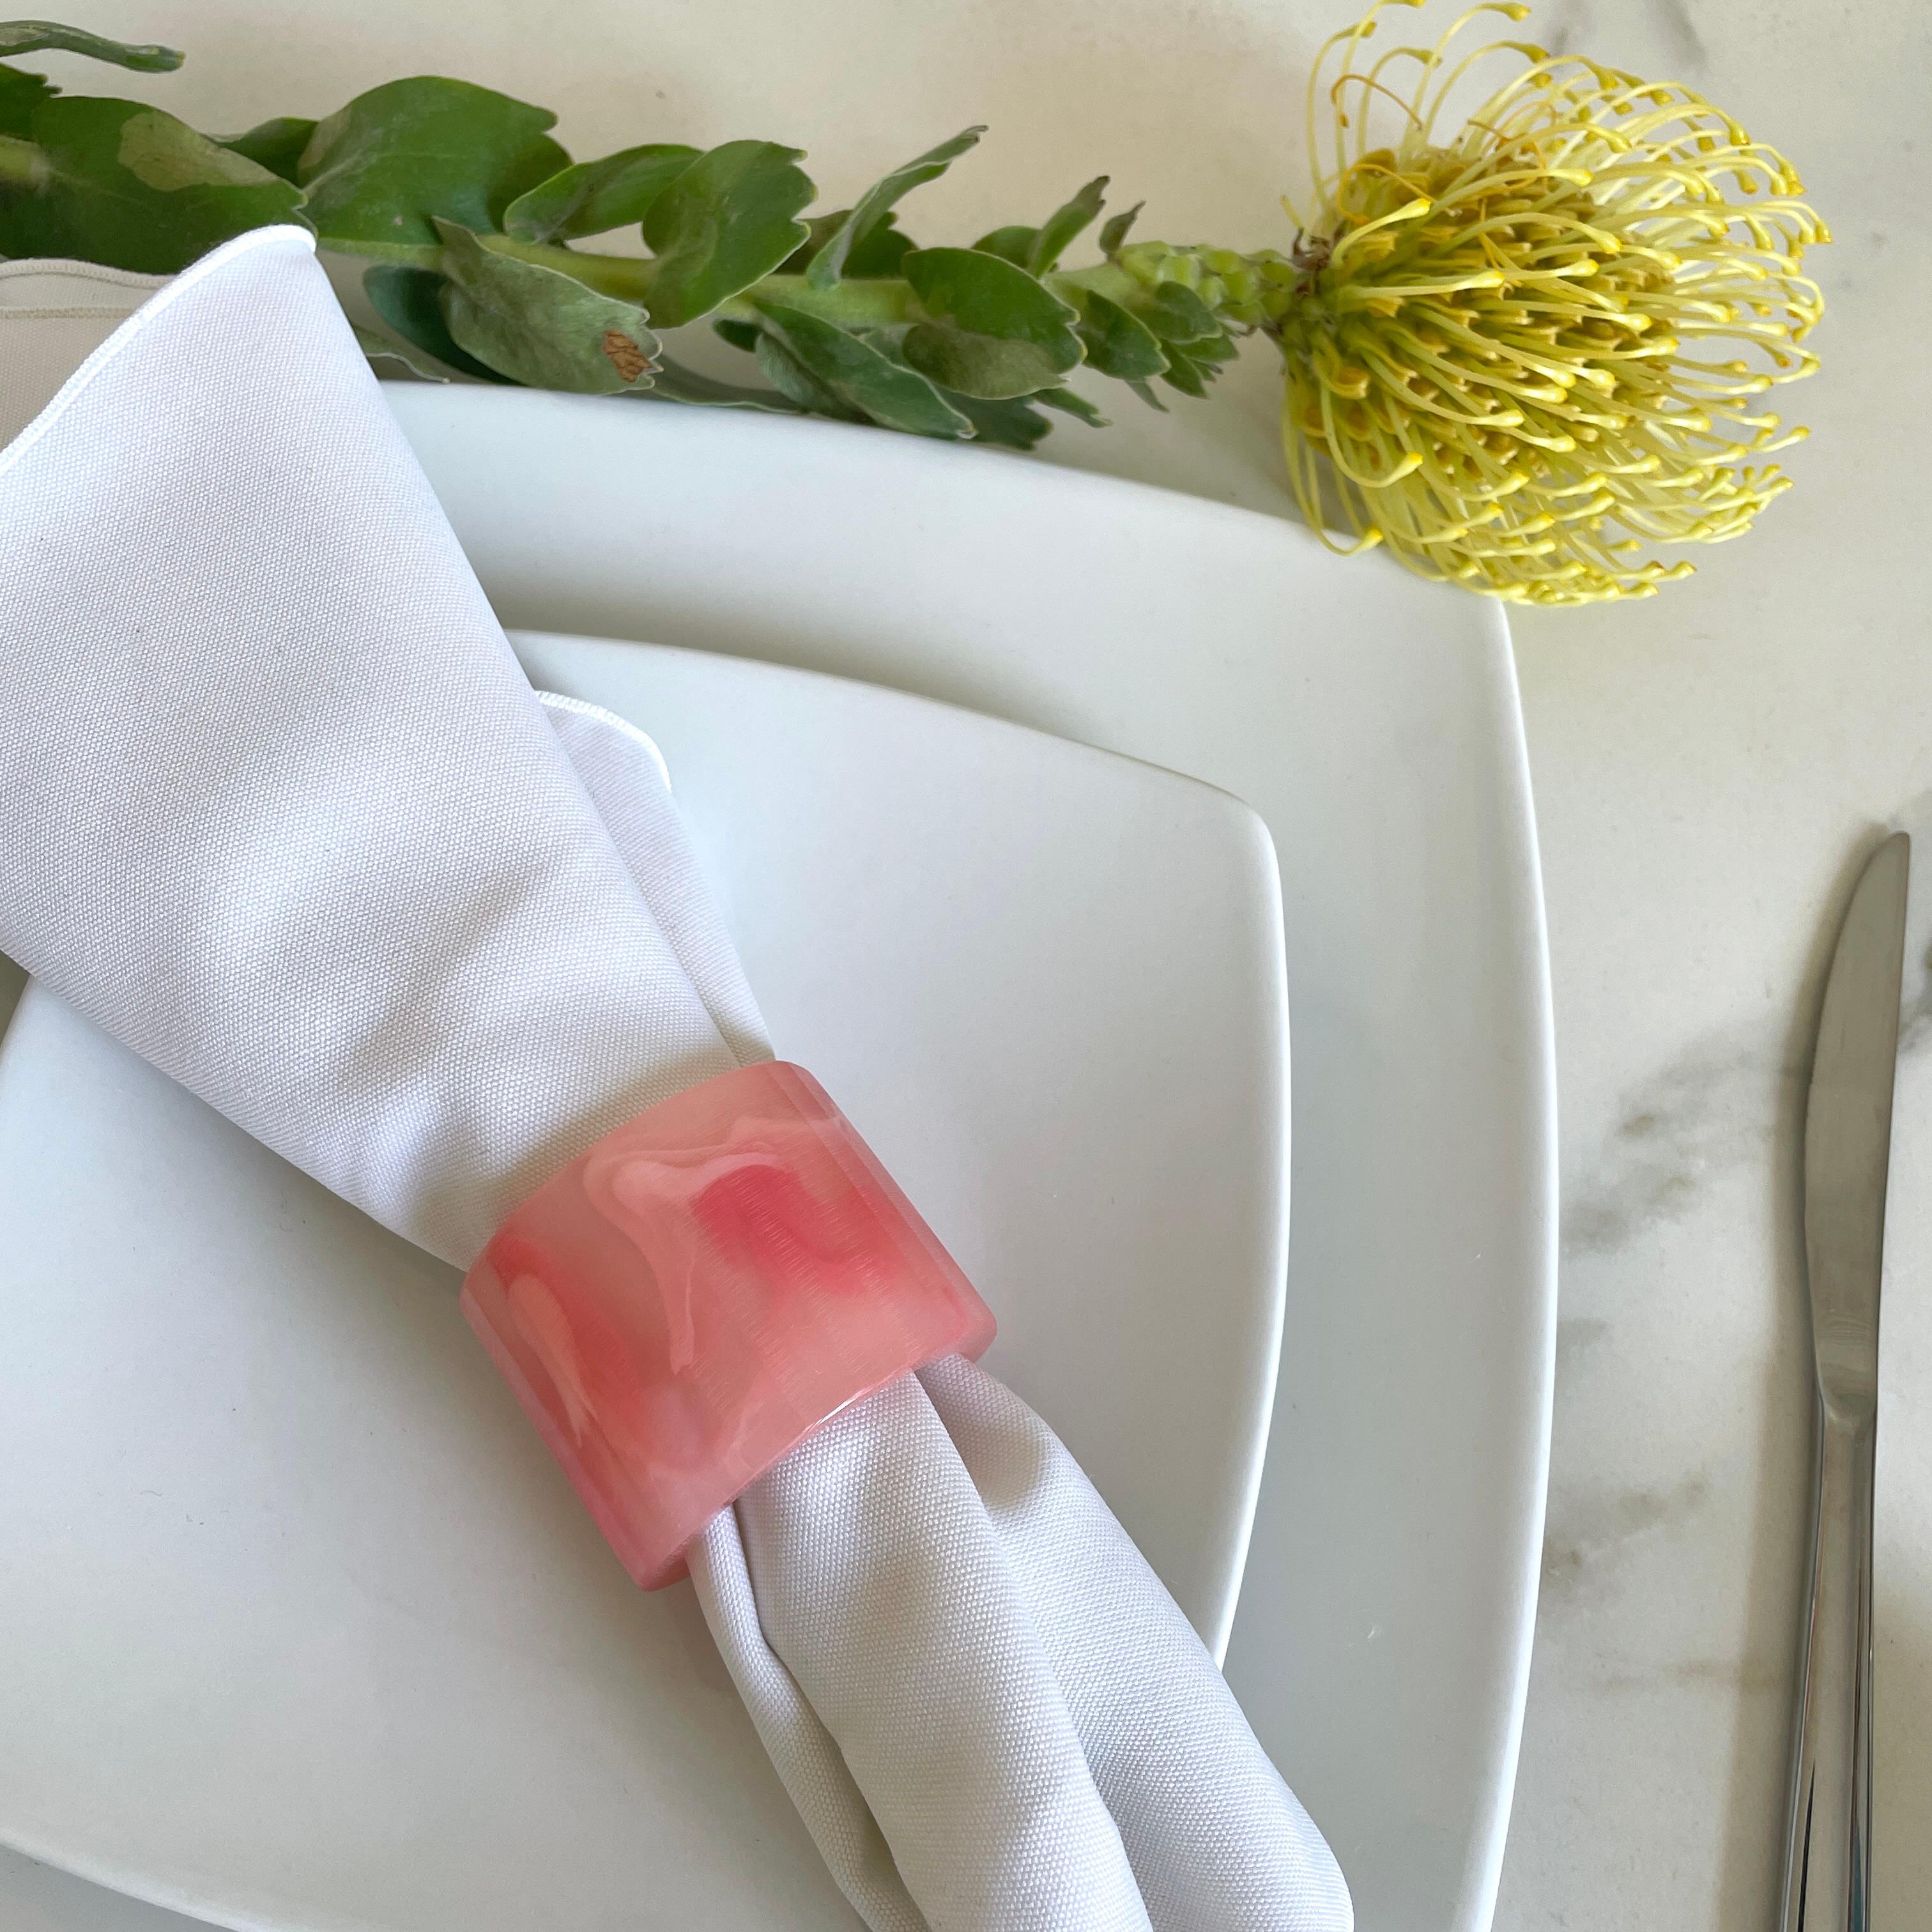 Our colourful, modern and playful resin napkin rings will be the perfect addition to your spring and summer tablescape. 
The set includes 4 napkin rings.

Designed by Paola Valle and manufactured in Mexico City by extraordinary artisans. Our goal